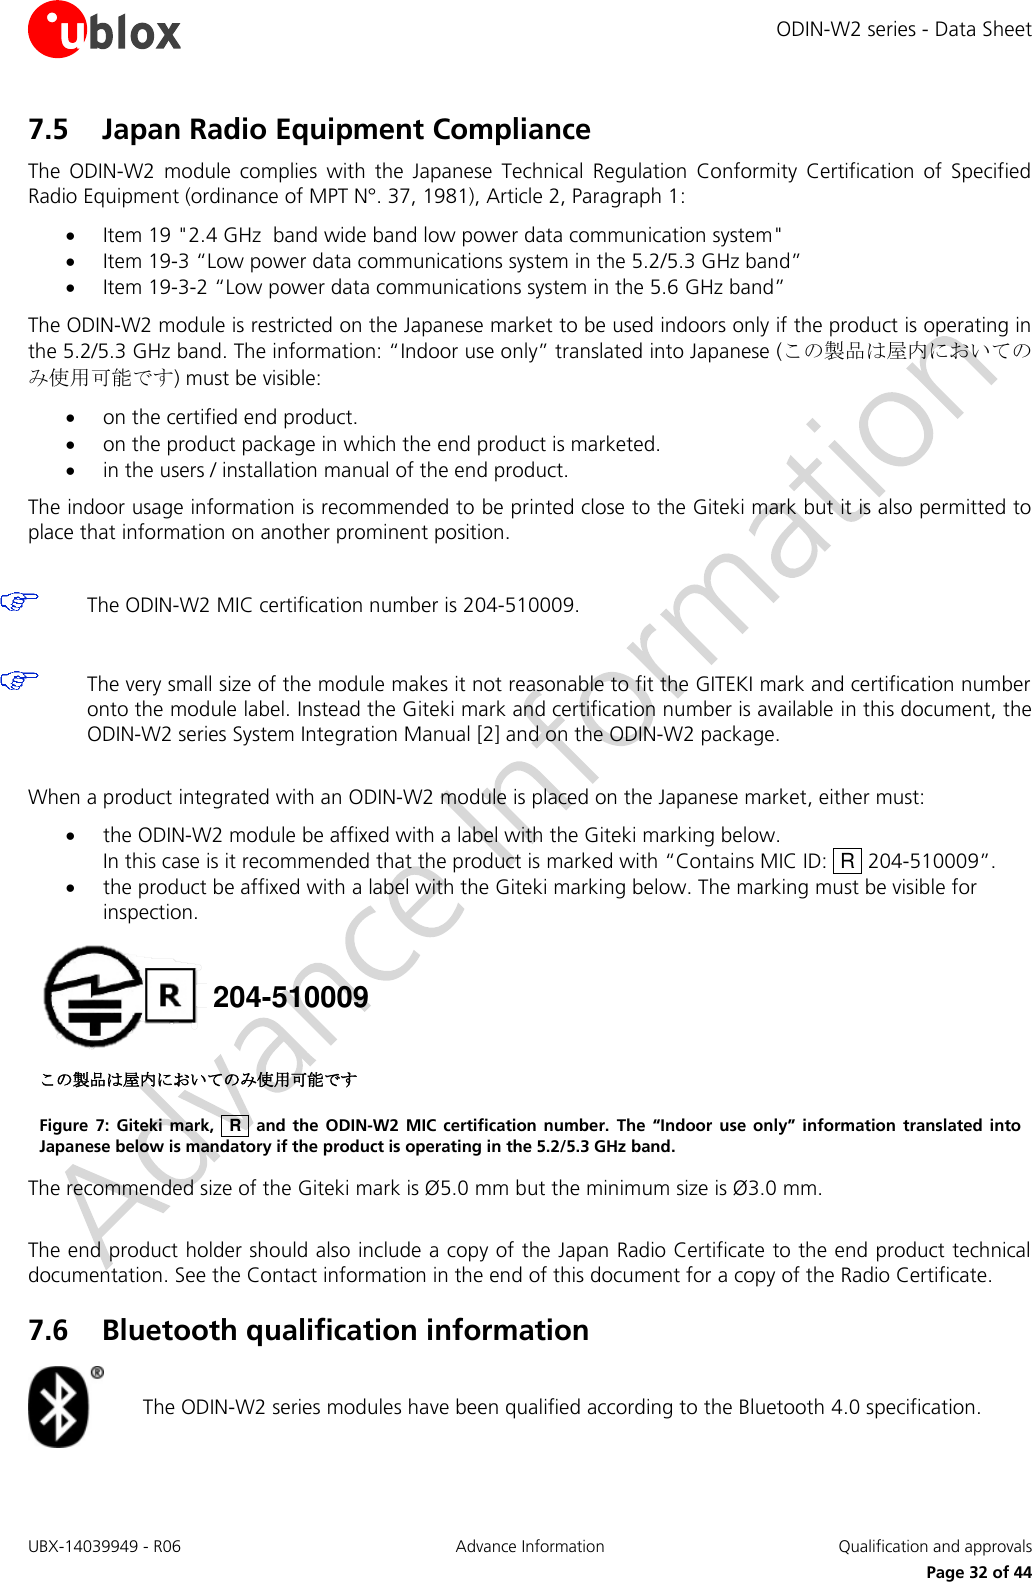 ODIN-W2 series - Data Sheet UBX-14039949 - R06 Advance Information  Qualification and approvals     Page 32 of 44 7.5 Japan Radio Equipment Compliance The  ODIN-W2  module  complies  with  the  Japanese  Technical  Regulation  Conformity  Certification  of  Specified Radio Equipment (ordinance of MPT N°. 37, 1981), Article 2, Paragraph 1:   Item 19 &quot;2.4 GHz  band wide band low power data communication system&quot;  Item 19-3 “Low power data communications system in the 5.2/5.3 GHz band”  Item 19-3-2 “Low power data communications system in the 5.6 GHz band”  The ODIN-W2 module is restricted on the Japanese market to be used indoors only if the product is operating in the 5.2/5.3 GHz band. The information: “Indoor use only” translated into Japanese (この製品は屋内においてのみ使用可能です) must be visible:  on the certified end product.   on the product package in which the end product is marketed.   in the users / installation manual of the end product. The indoor usage information is recommended to be printed close to the Giteki mark but it is also permitted to place that information on another prominent position.   The ODIN-W2 MIC certification number is 204-510009.   The very small size of the module makes it not reasonable to fit the GITEKI mark and certification number onto the module label. Instead the Giteki mark and certification number is available in this document, the ODIN-W2 series System Integration Manual [2] and on the ODIN-W2 package.   When a product integrated with an ODIN-W2 module is placed on the Japanese market, either must:  the ODIN-W2 module be affixed with a label with the Giteki marking below.  In this case is it recommended that the product is marked with “Contains MIC ID:  R  204-510009”.  the product be affixed with a label with the Giteki marking below. The marking must be visible for inspection.  204-510009 この製品は屋内においてのみ使用可能です Figure  7:  Giteki mark,   R    and the  ODIN-W2  MIC  certification number.  The  “Indoor  use  only”  information  translated into Japanese below is mandatory if the product is operating in the 5.2/5.3 GHz band. The recommended size of the Giteki mark is Ø5.0 mm but the minimum size is Ø3.0 mm.   The end product holder should also include a copy of the Japan Radio Certificate to the end product technical documentation. See the Contact information in the end of this document for a copy of the Radio Certificate. 7.6 Bluetooth qualification information  The ODIN-W2 series modules have been qualified according to the Bluetooth 4.0 specification.  